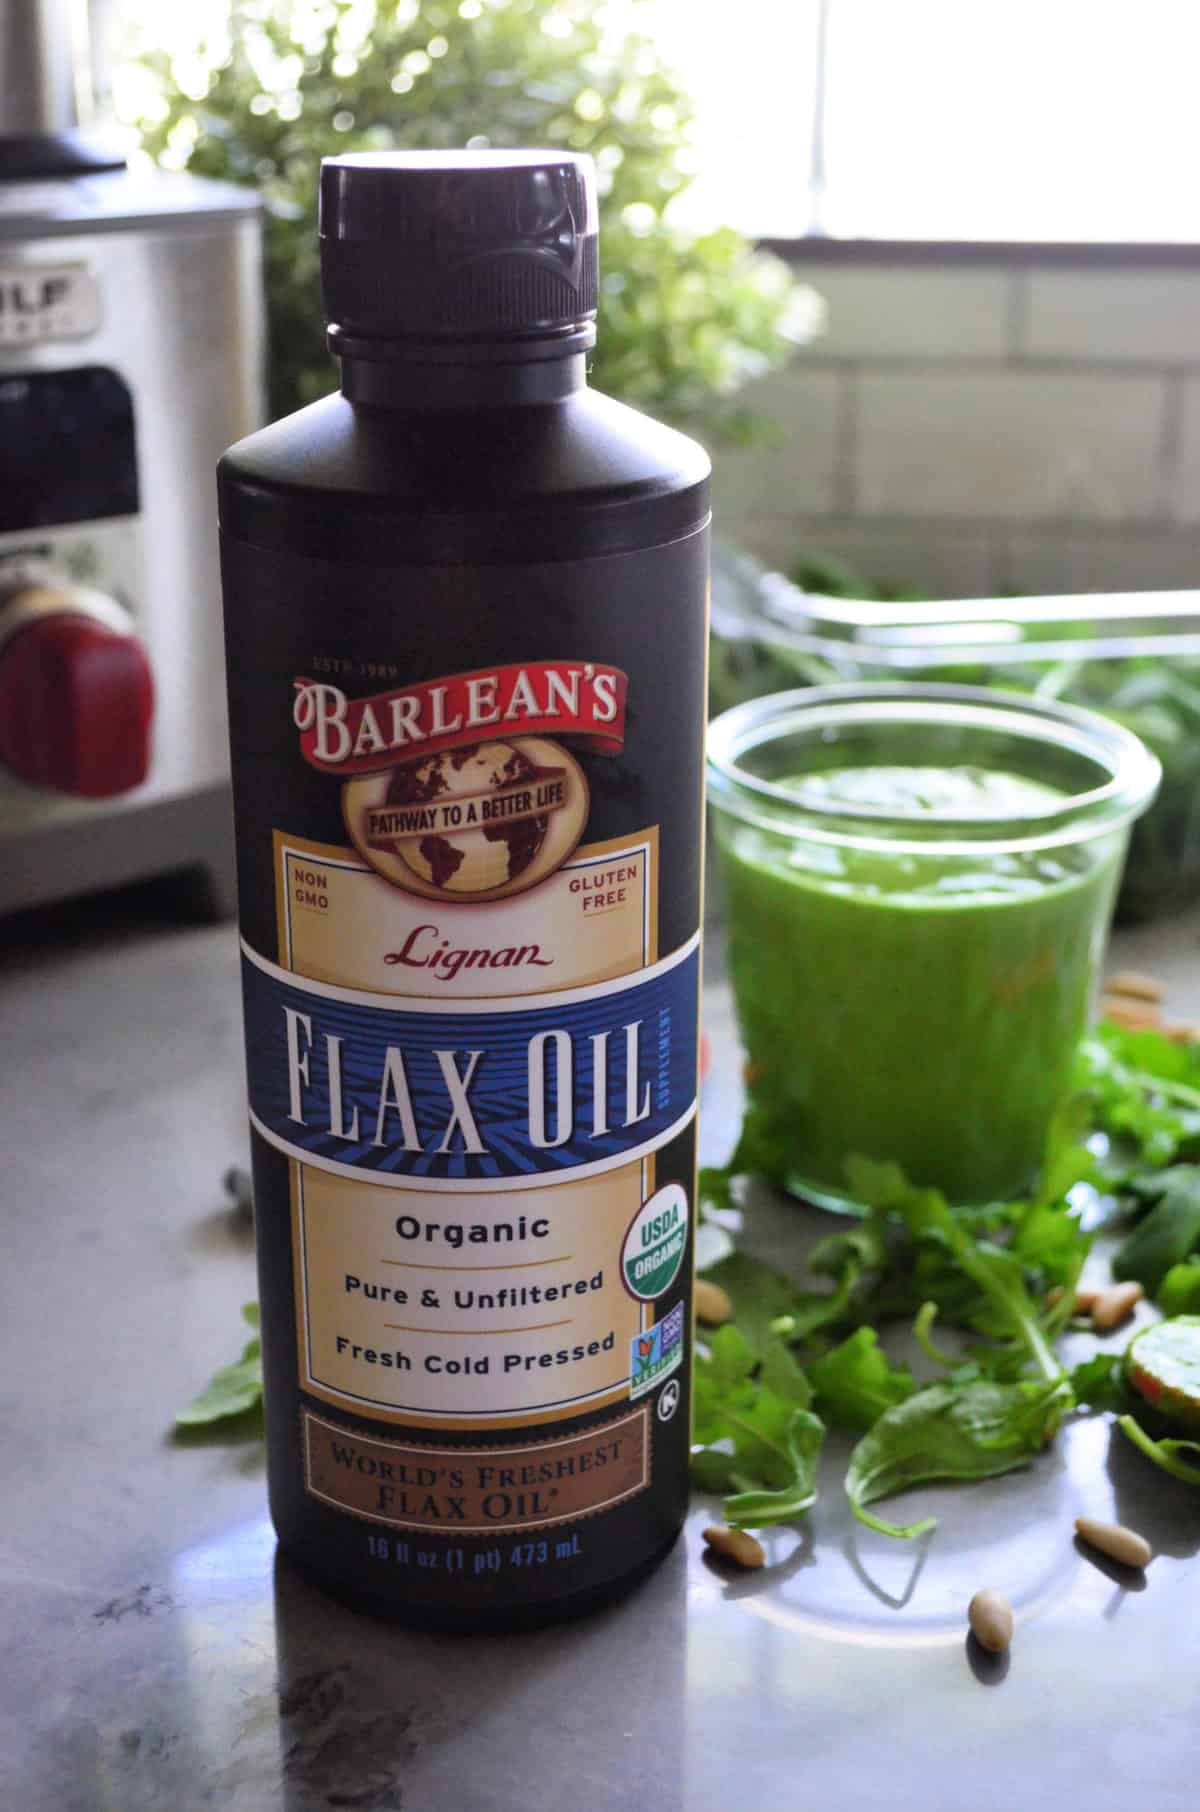 closeup bottle of Barlean's Flax Oil with glass of green sauce in background.